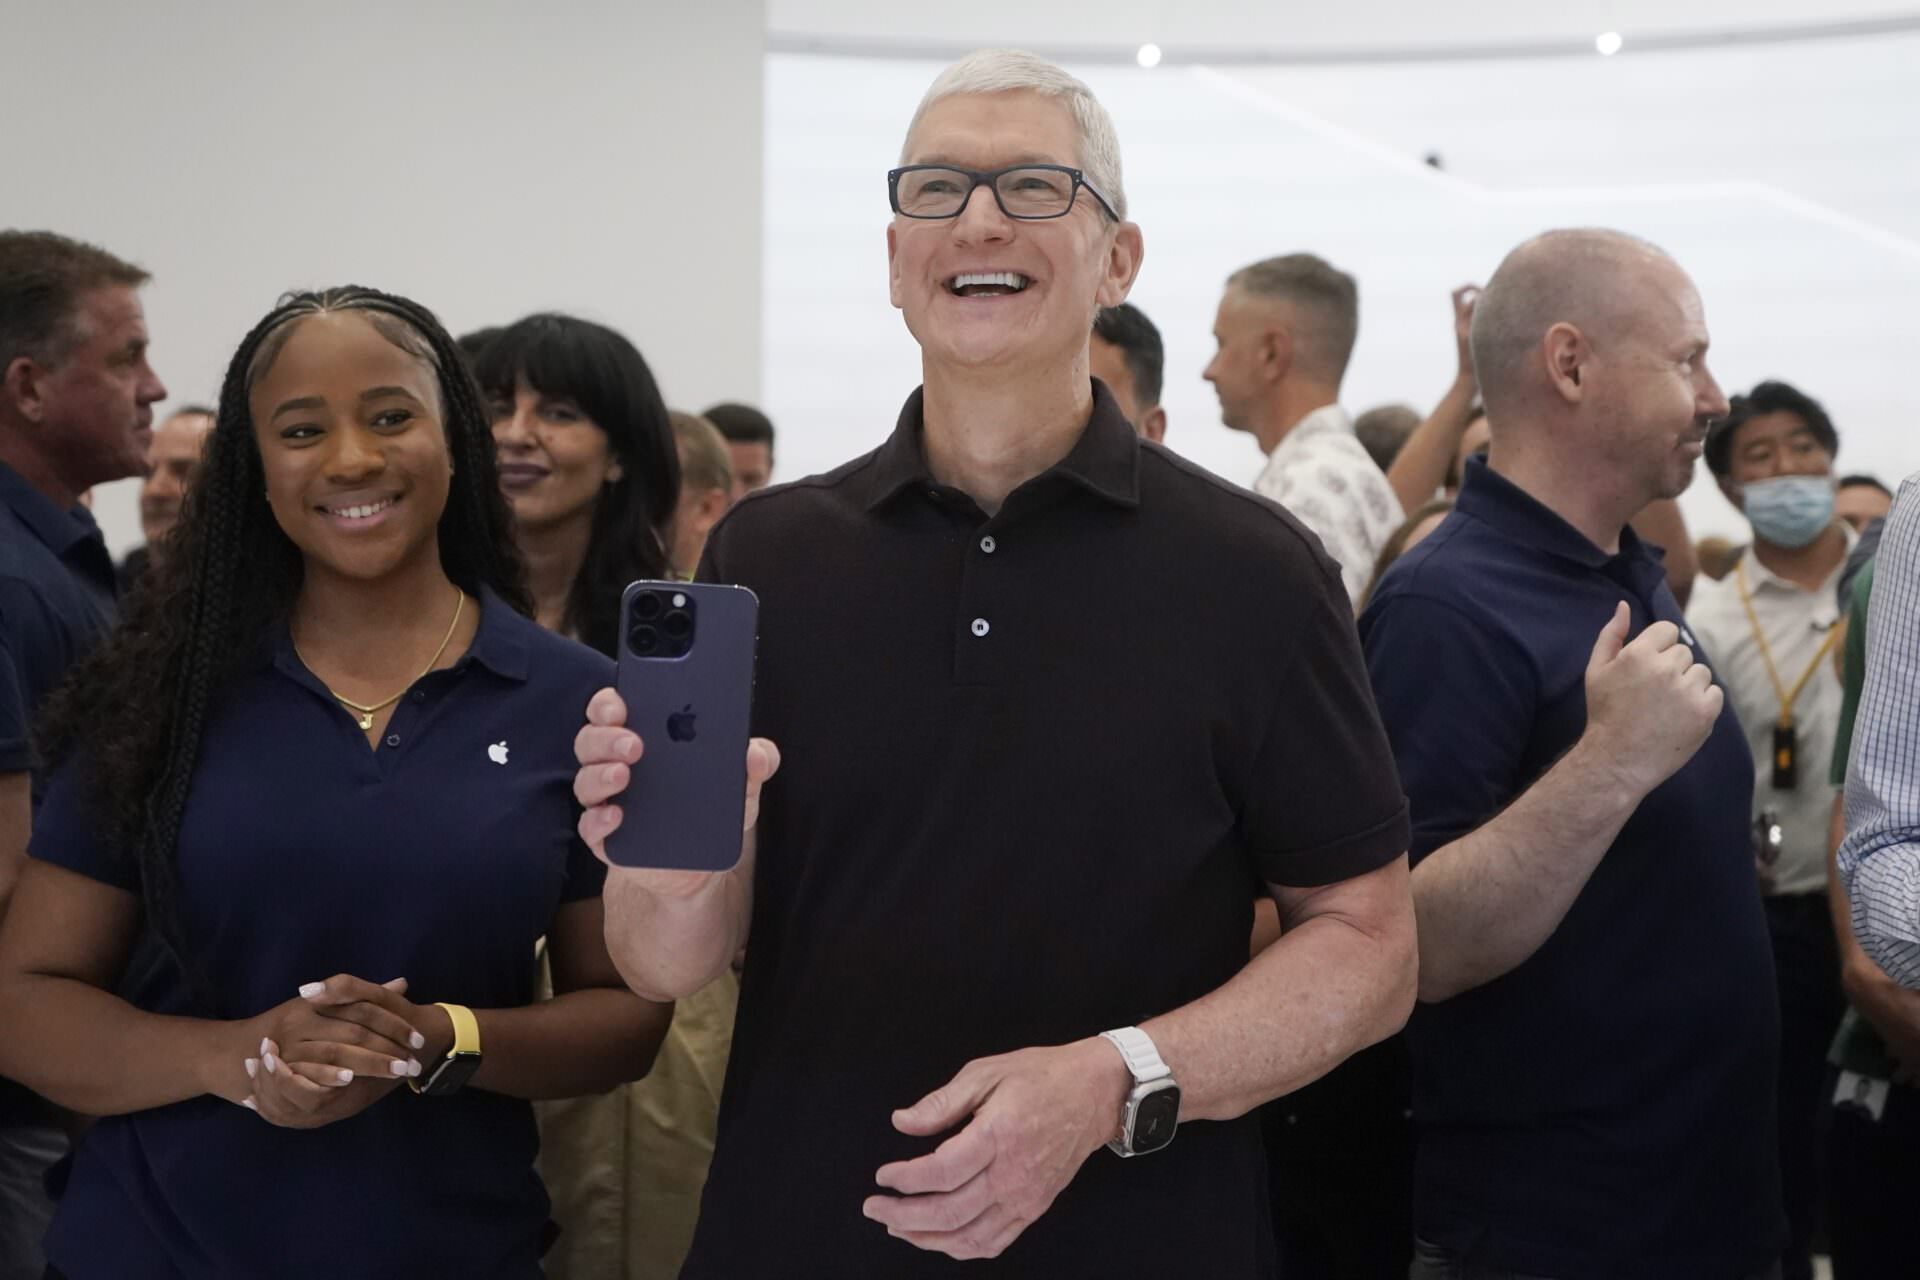 Apple CEO Tim Cook holds a new iPhone model at an Apple event on the campus of Apple's headquarters in Cupertino, Calif., Wednesday, Sept. 7, 2022. (AP Photo/Jeff Chiu)